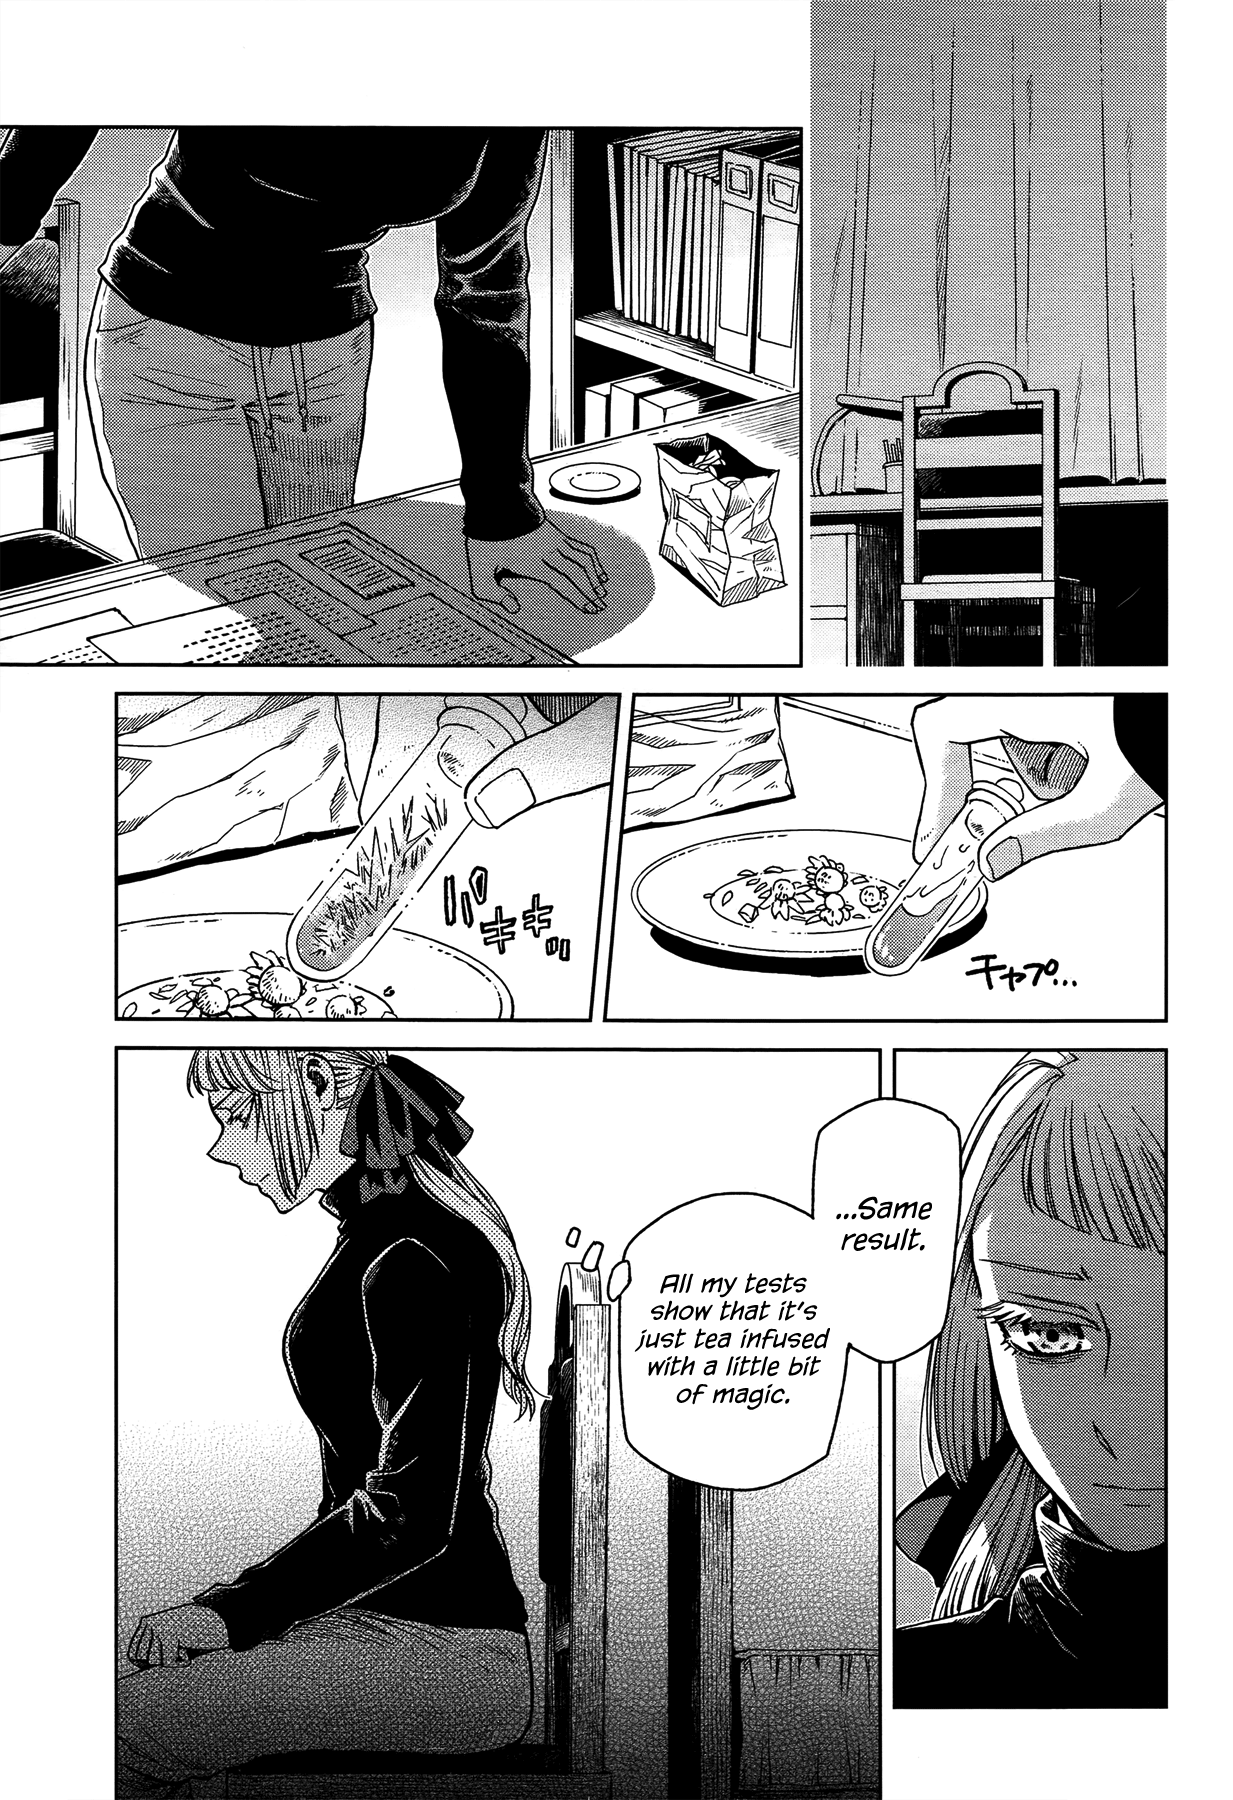 Mahoutsukai no Yome Vol.11-Chapter.53-First-impressions-are-the-most-lasting-I Image